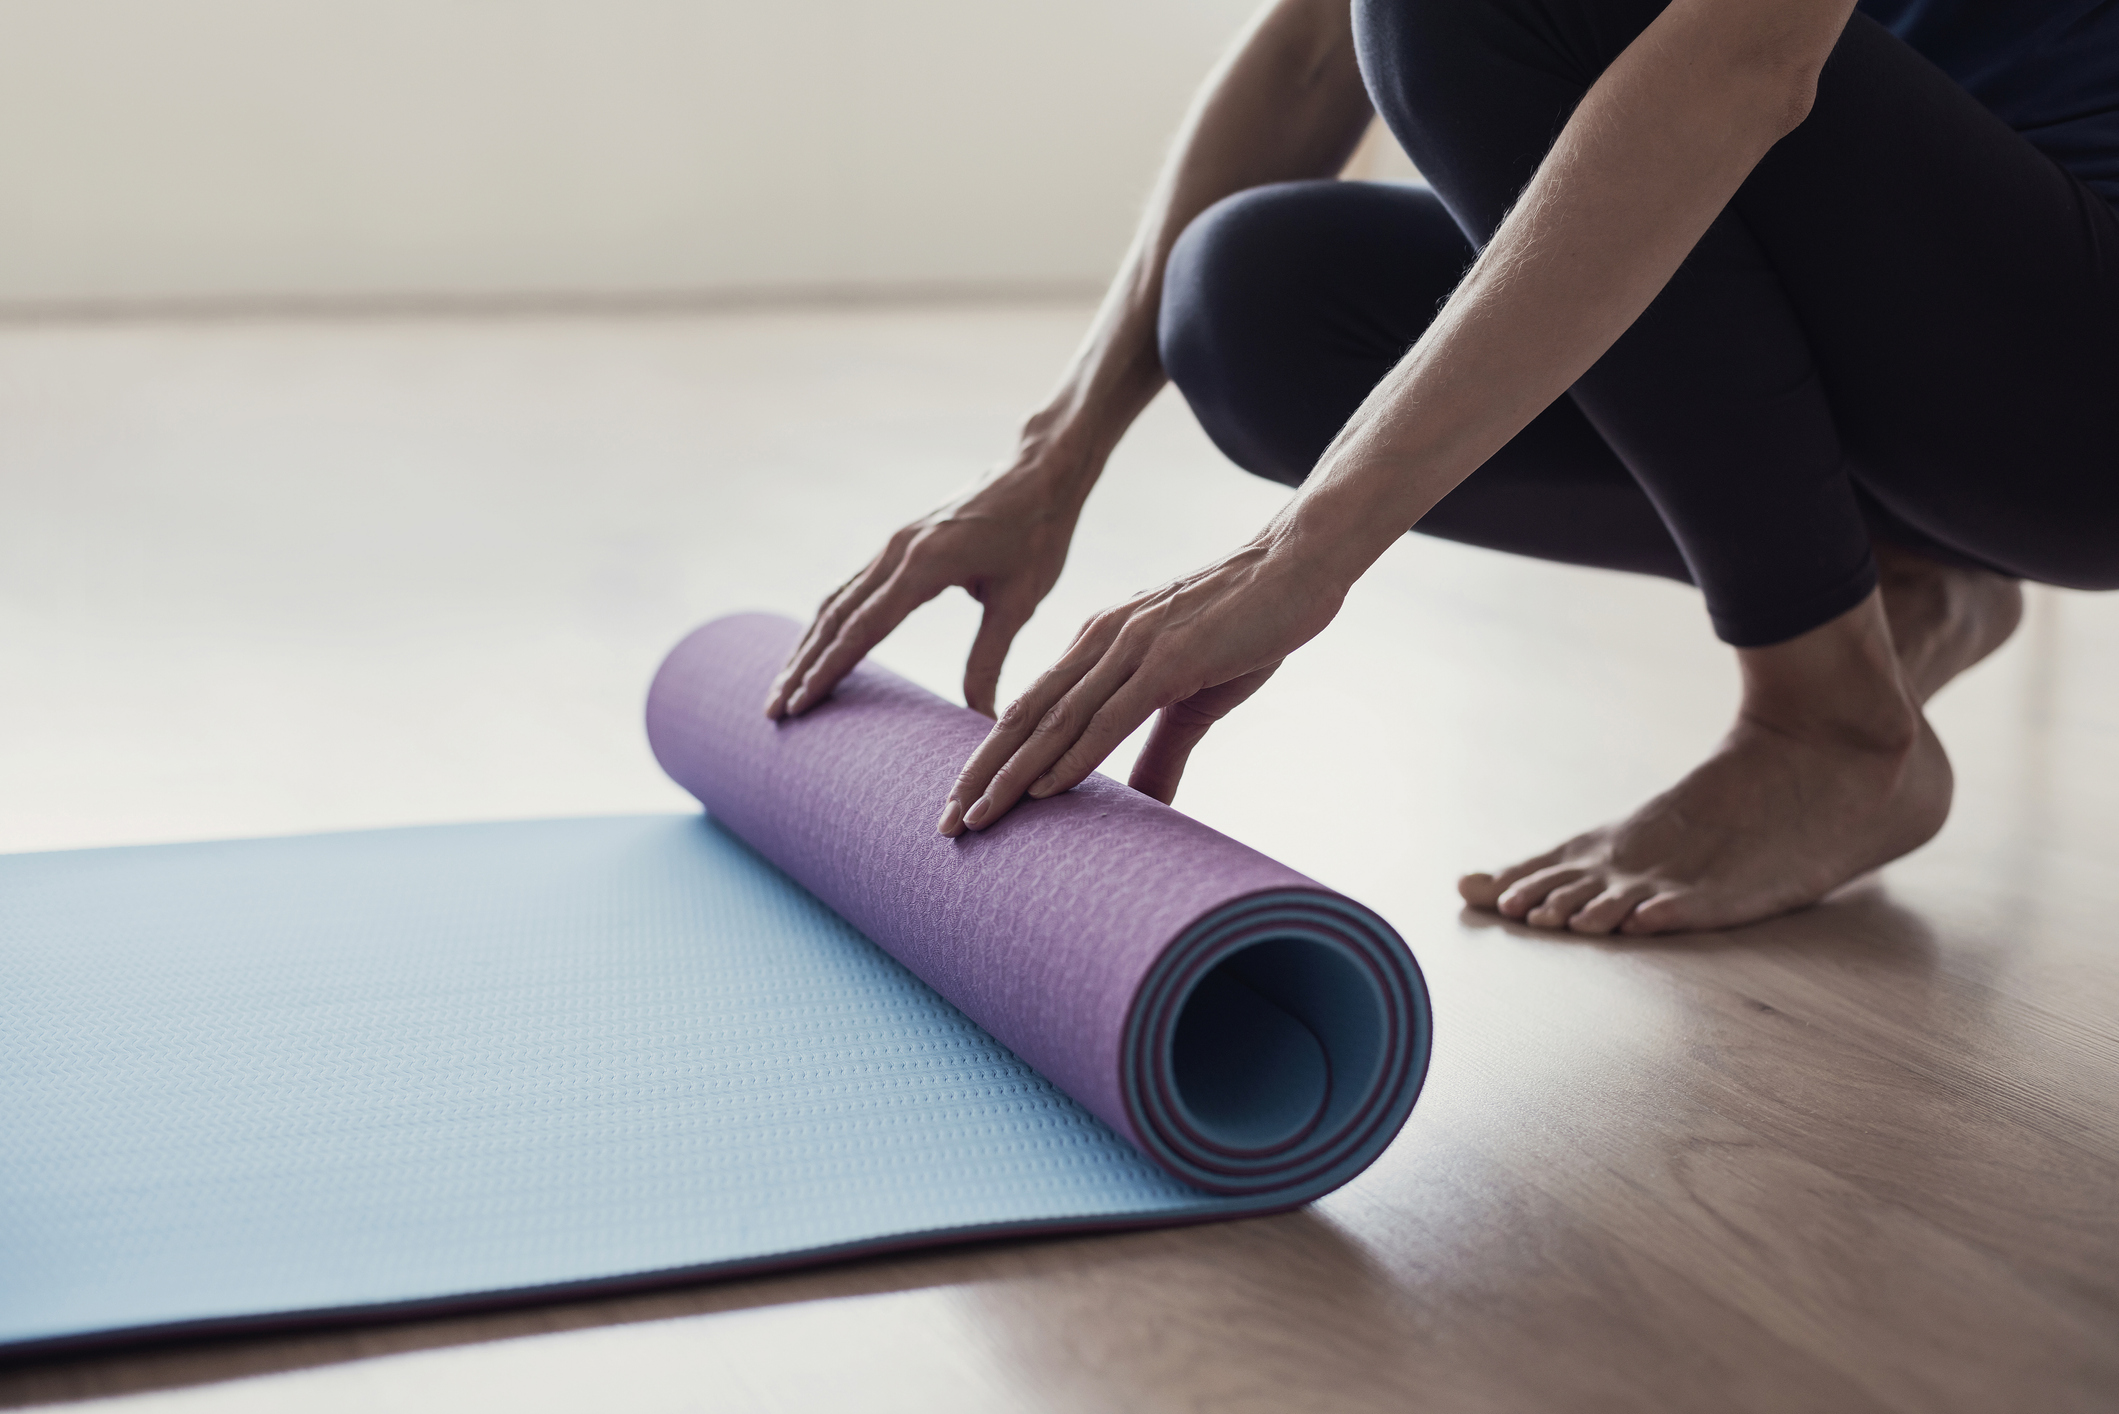 CEH Finds Toxic Chemical in Lululemon Yoga Mat - Center for